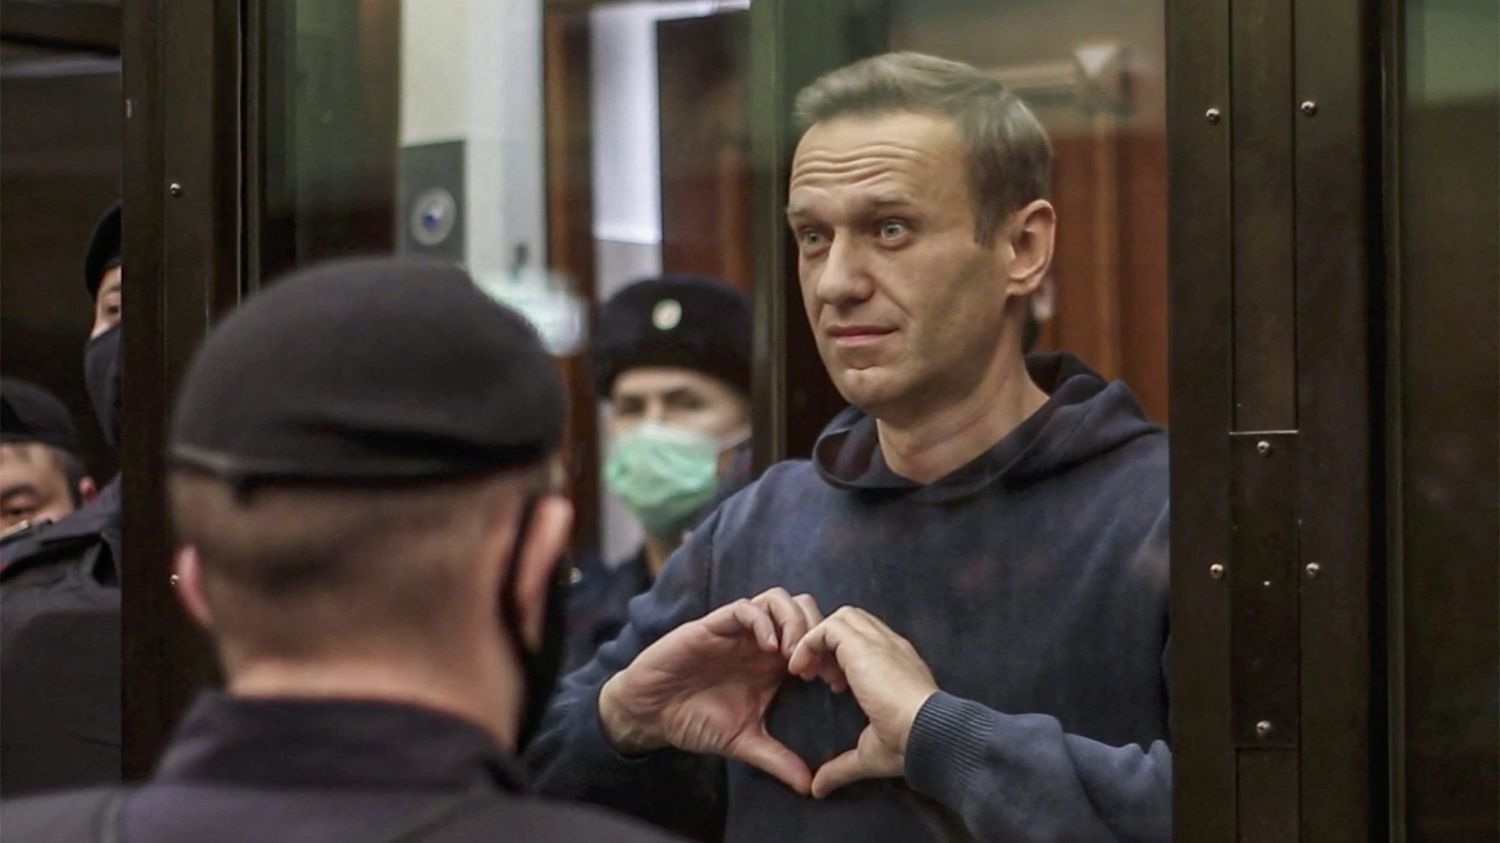 With Alexei Navalny, opposition “rises,” “fears are changing sides,” says one researcher

